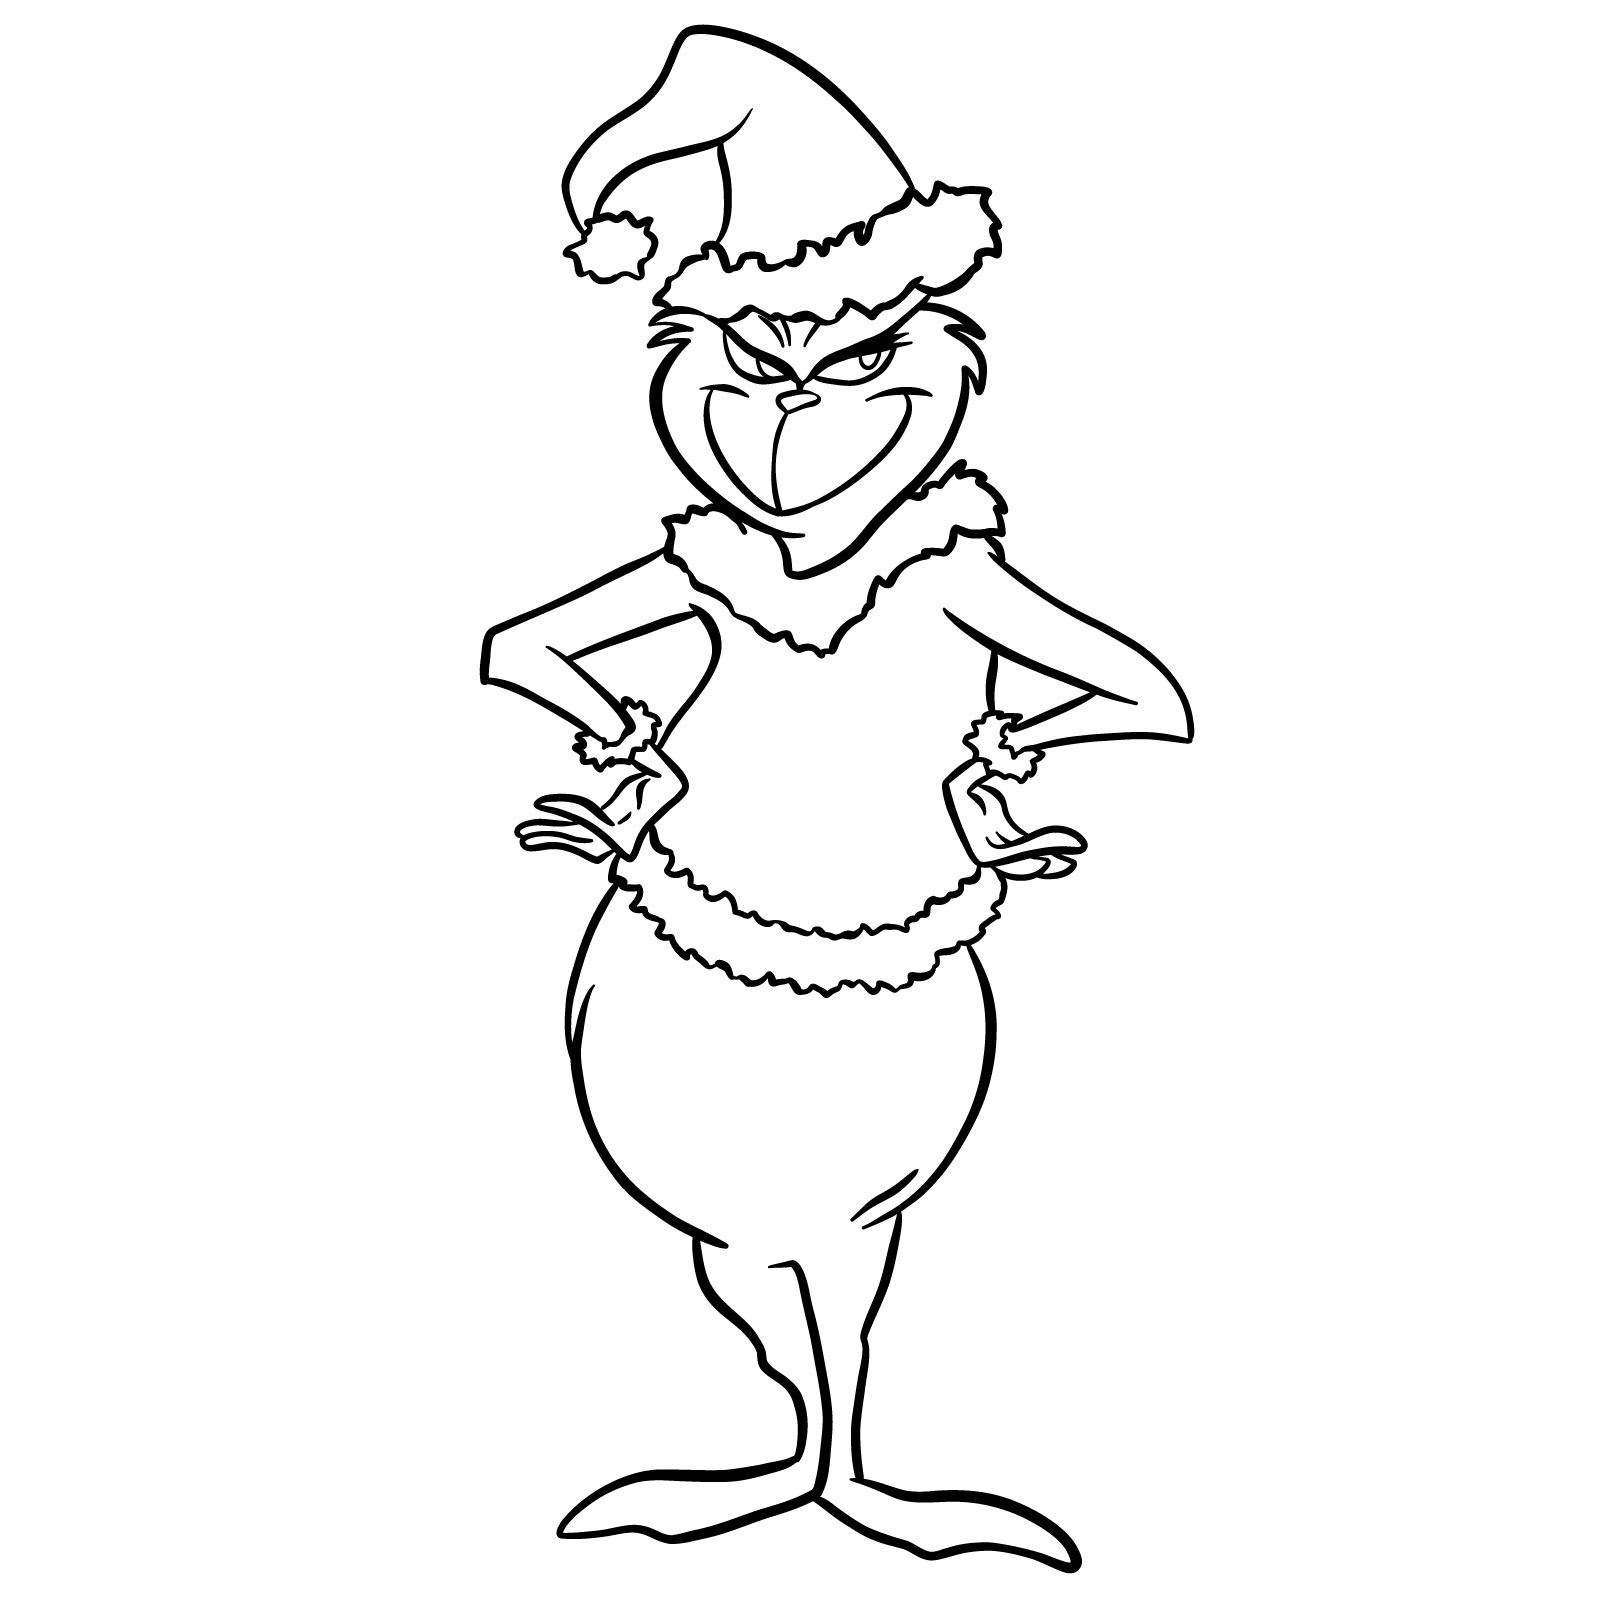 How to draw The Grinch in a Christmas costume - step 27